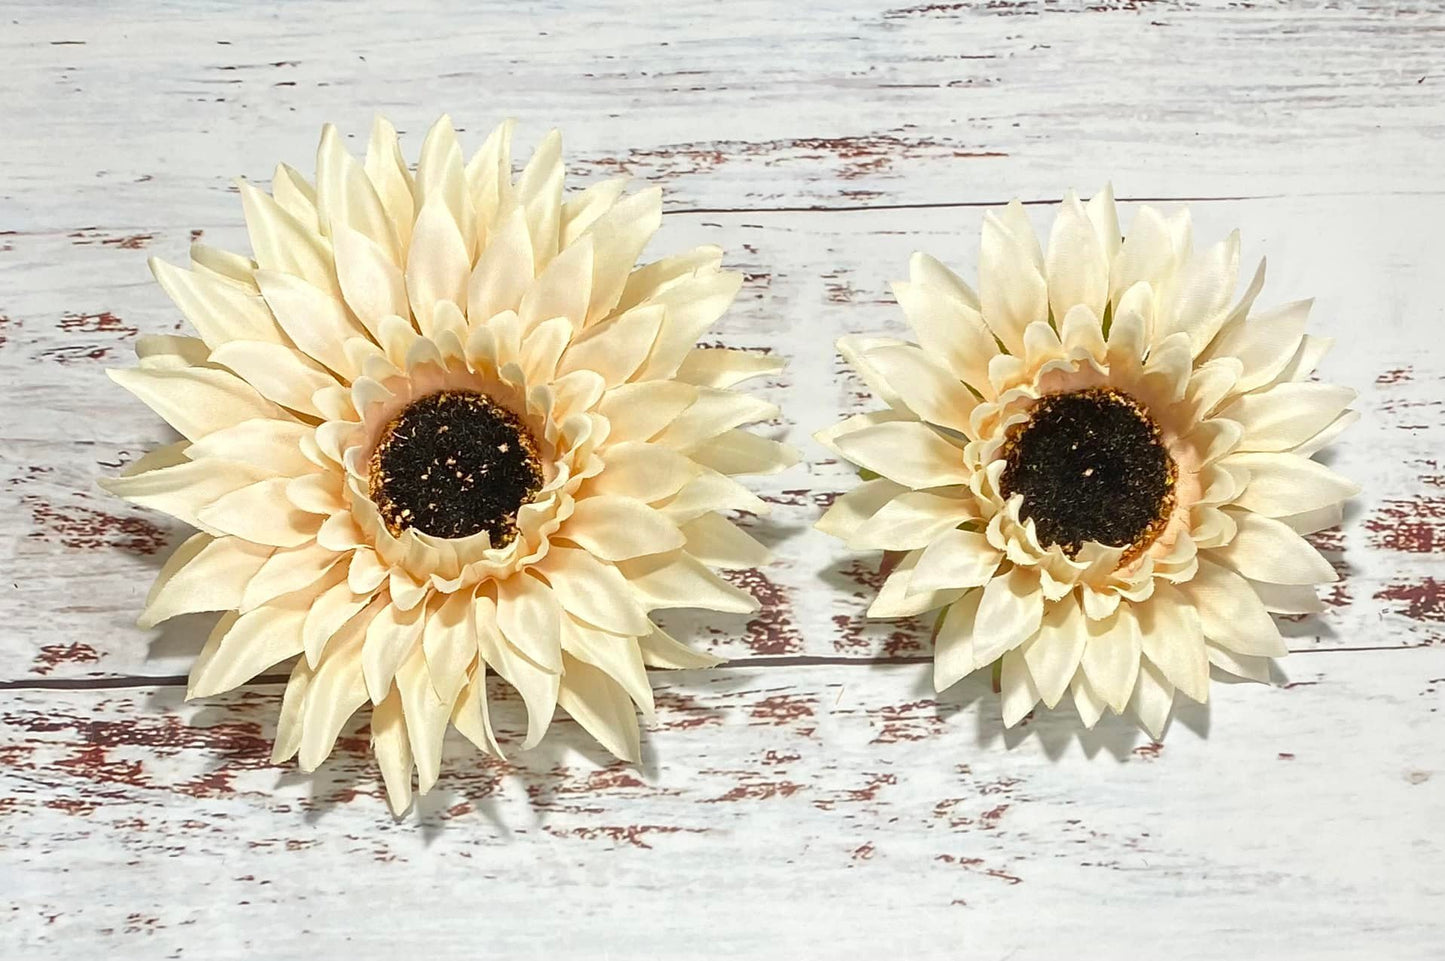 "Premium Sunflowers" Forever Flowerz approx 80